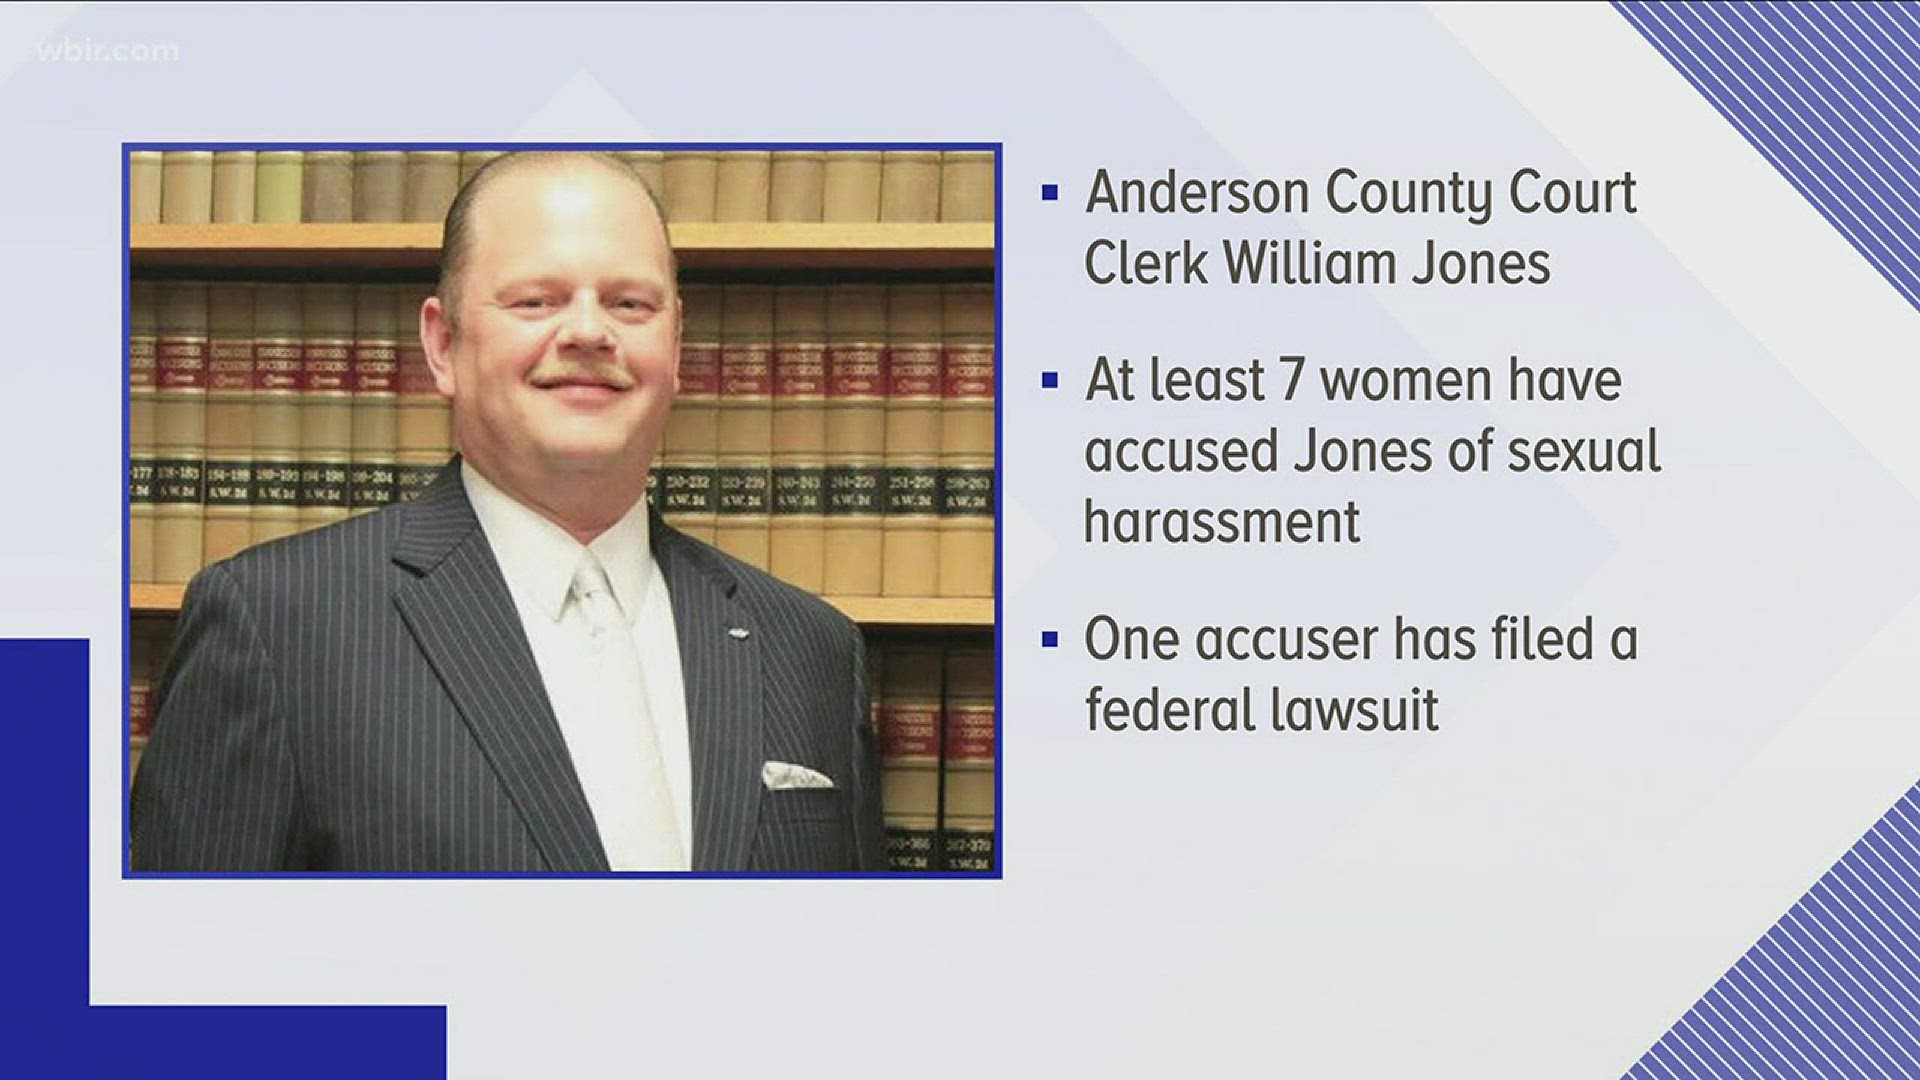 Anderson County Commission is set Monday night to hear Terry Frank's request.